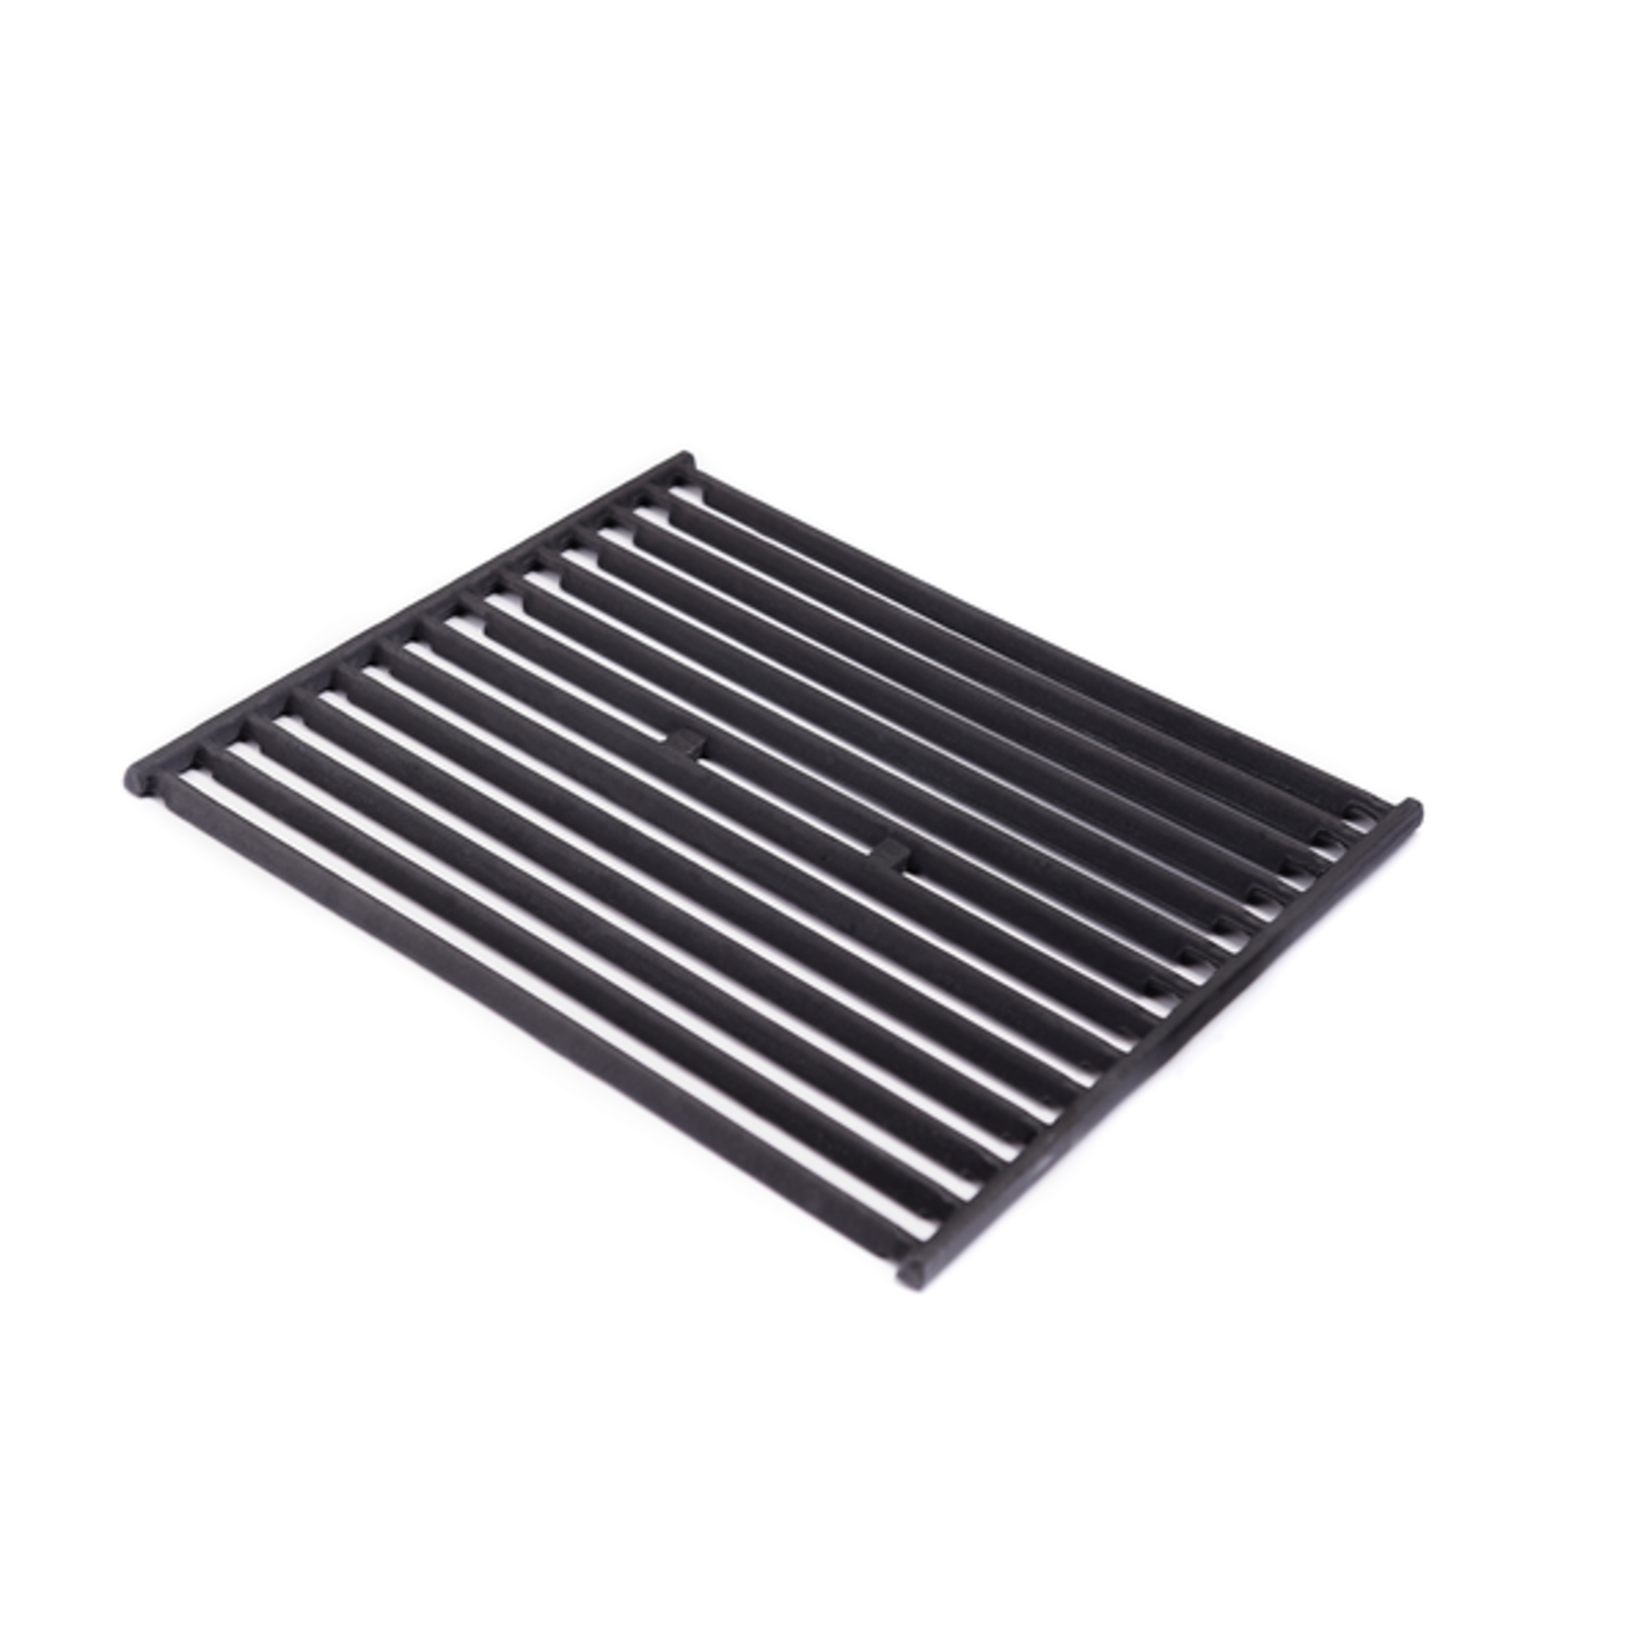 Broil King Cooking Grid - Signet/Crown - Cast Iron - 1 Piece